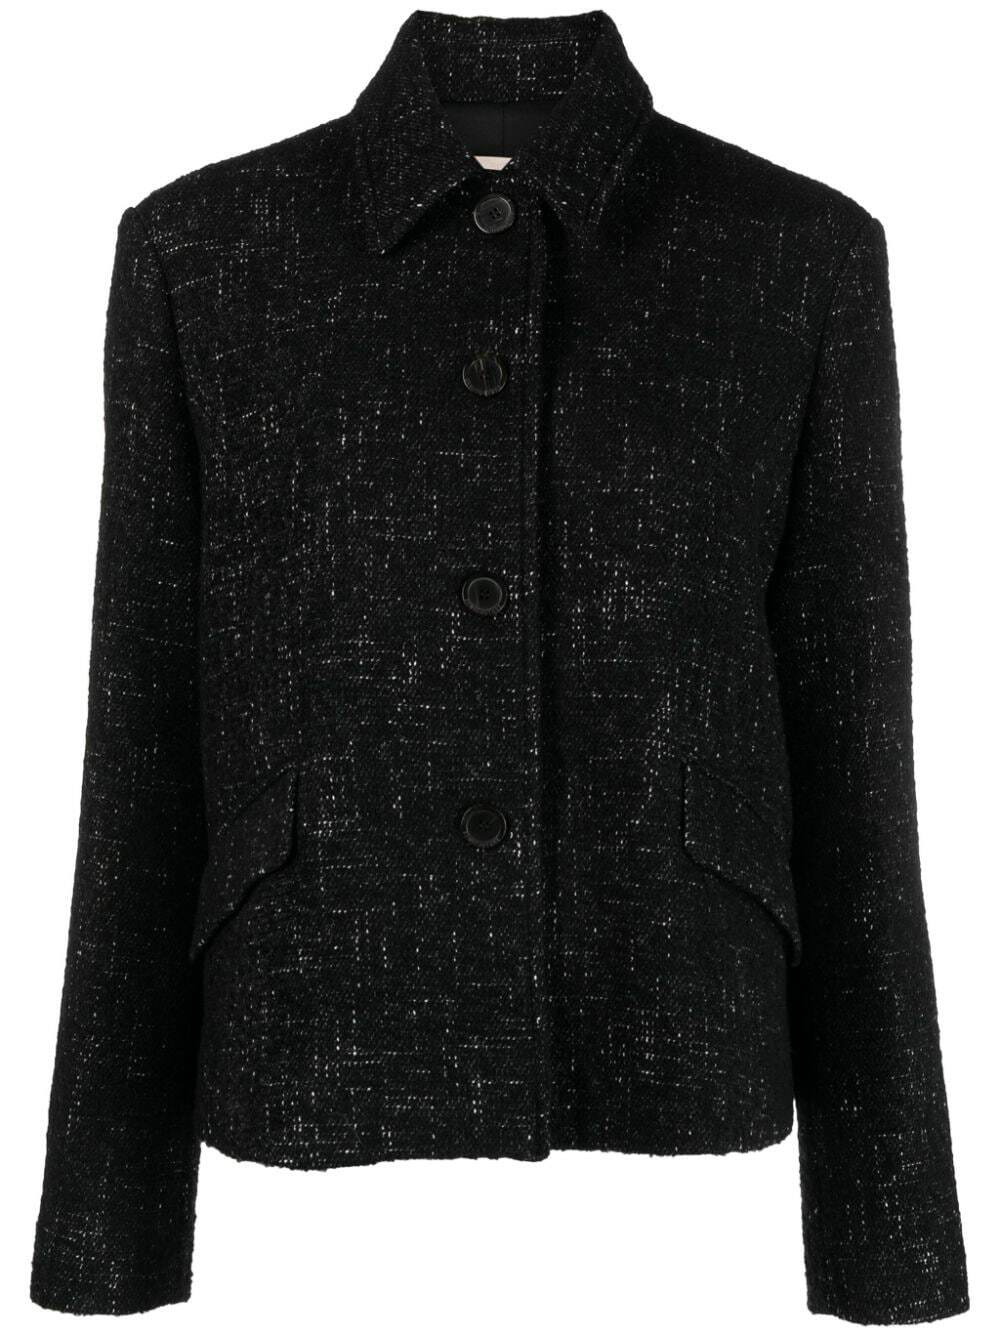 SEMICOUTURE - Avril Tweed Jacket Semicouture